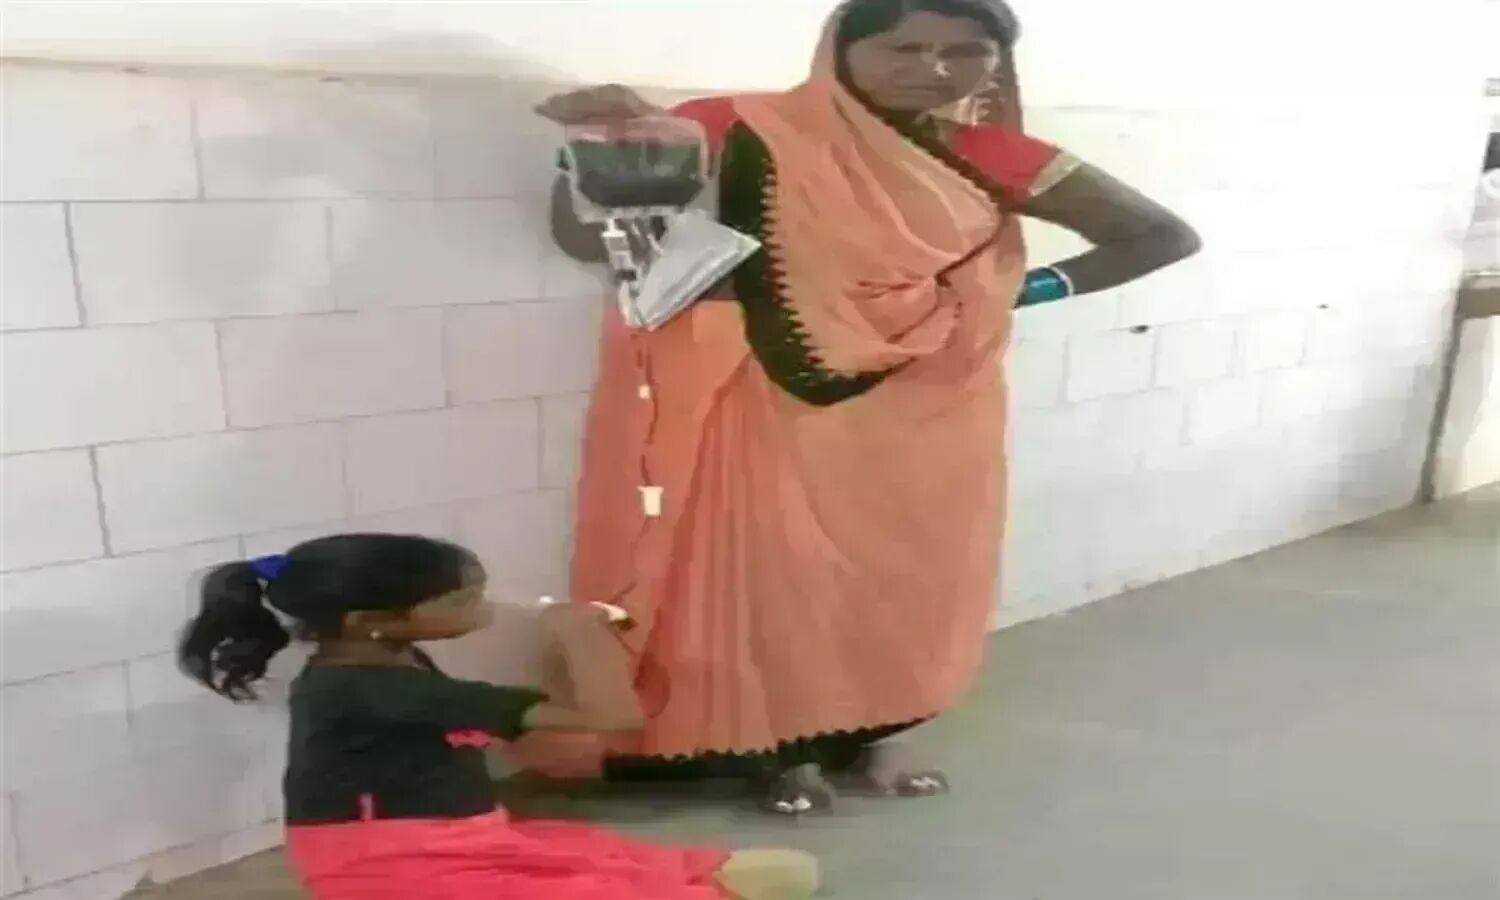 Madhya Pradesh: The health system of the state of Madhya Pradesh groaning, blood was offered to the girl sitting on the ground in the hospital